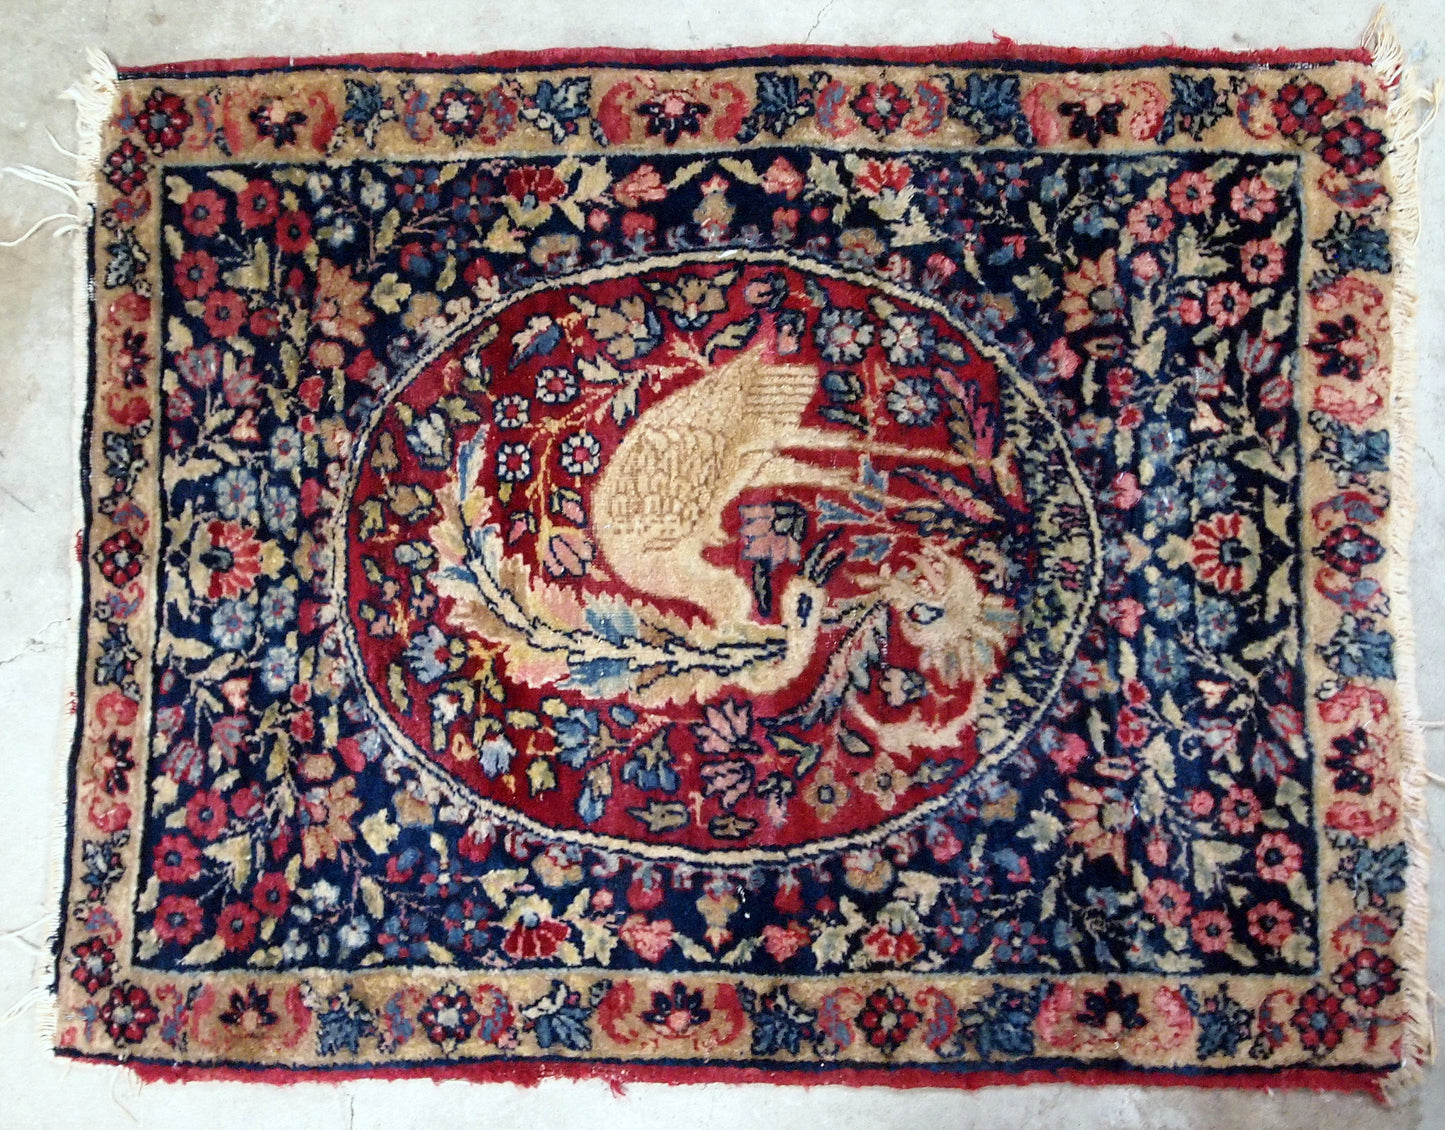 Handmade antique Persian Kerman Lavar collectible rug with bird. It is in original condition, the ends are missing and some low pile. The rug is from the end of 19th century.